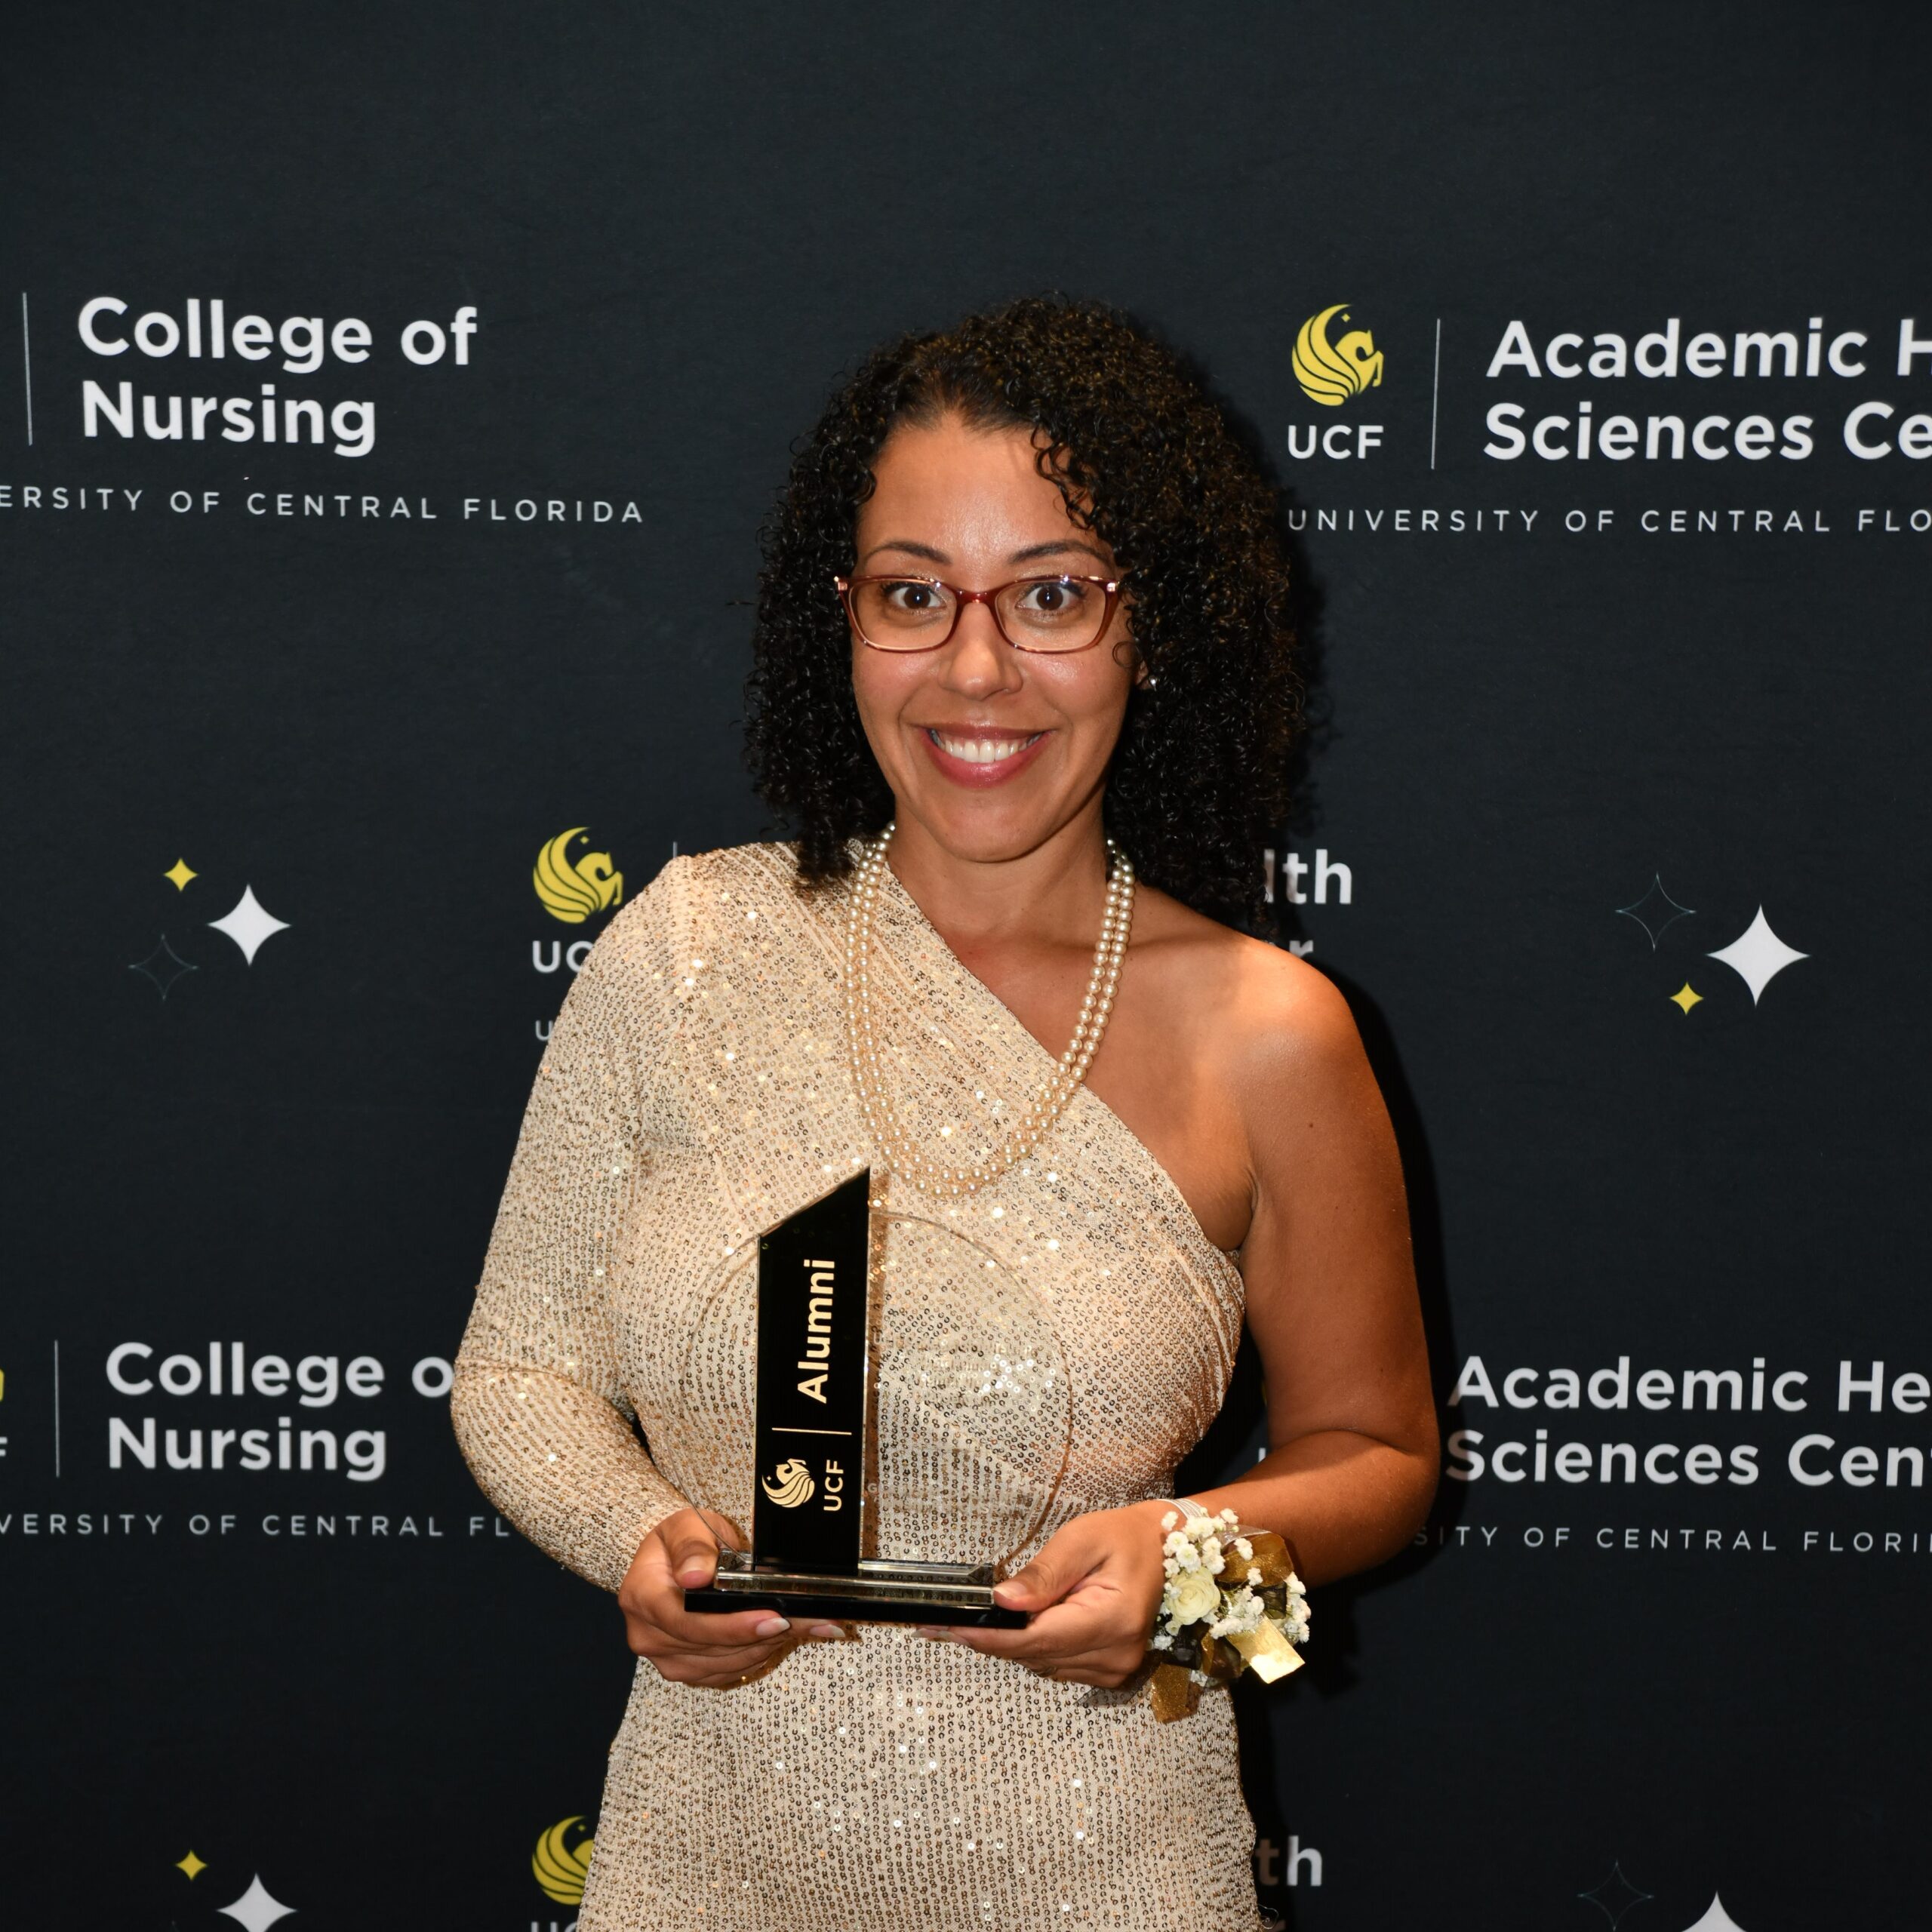 Gladys Dushane holding a crystal UCF Alumni award in front of a UCF College of Nursing banner